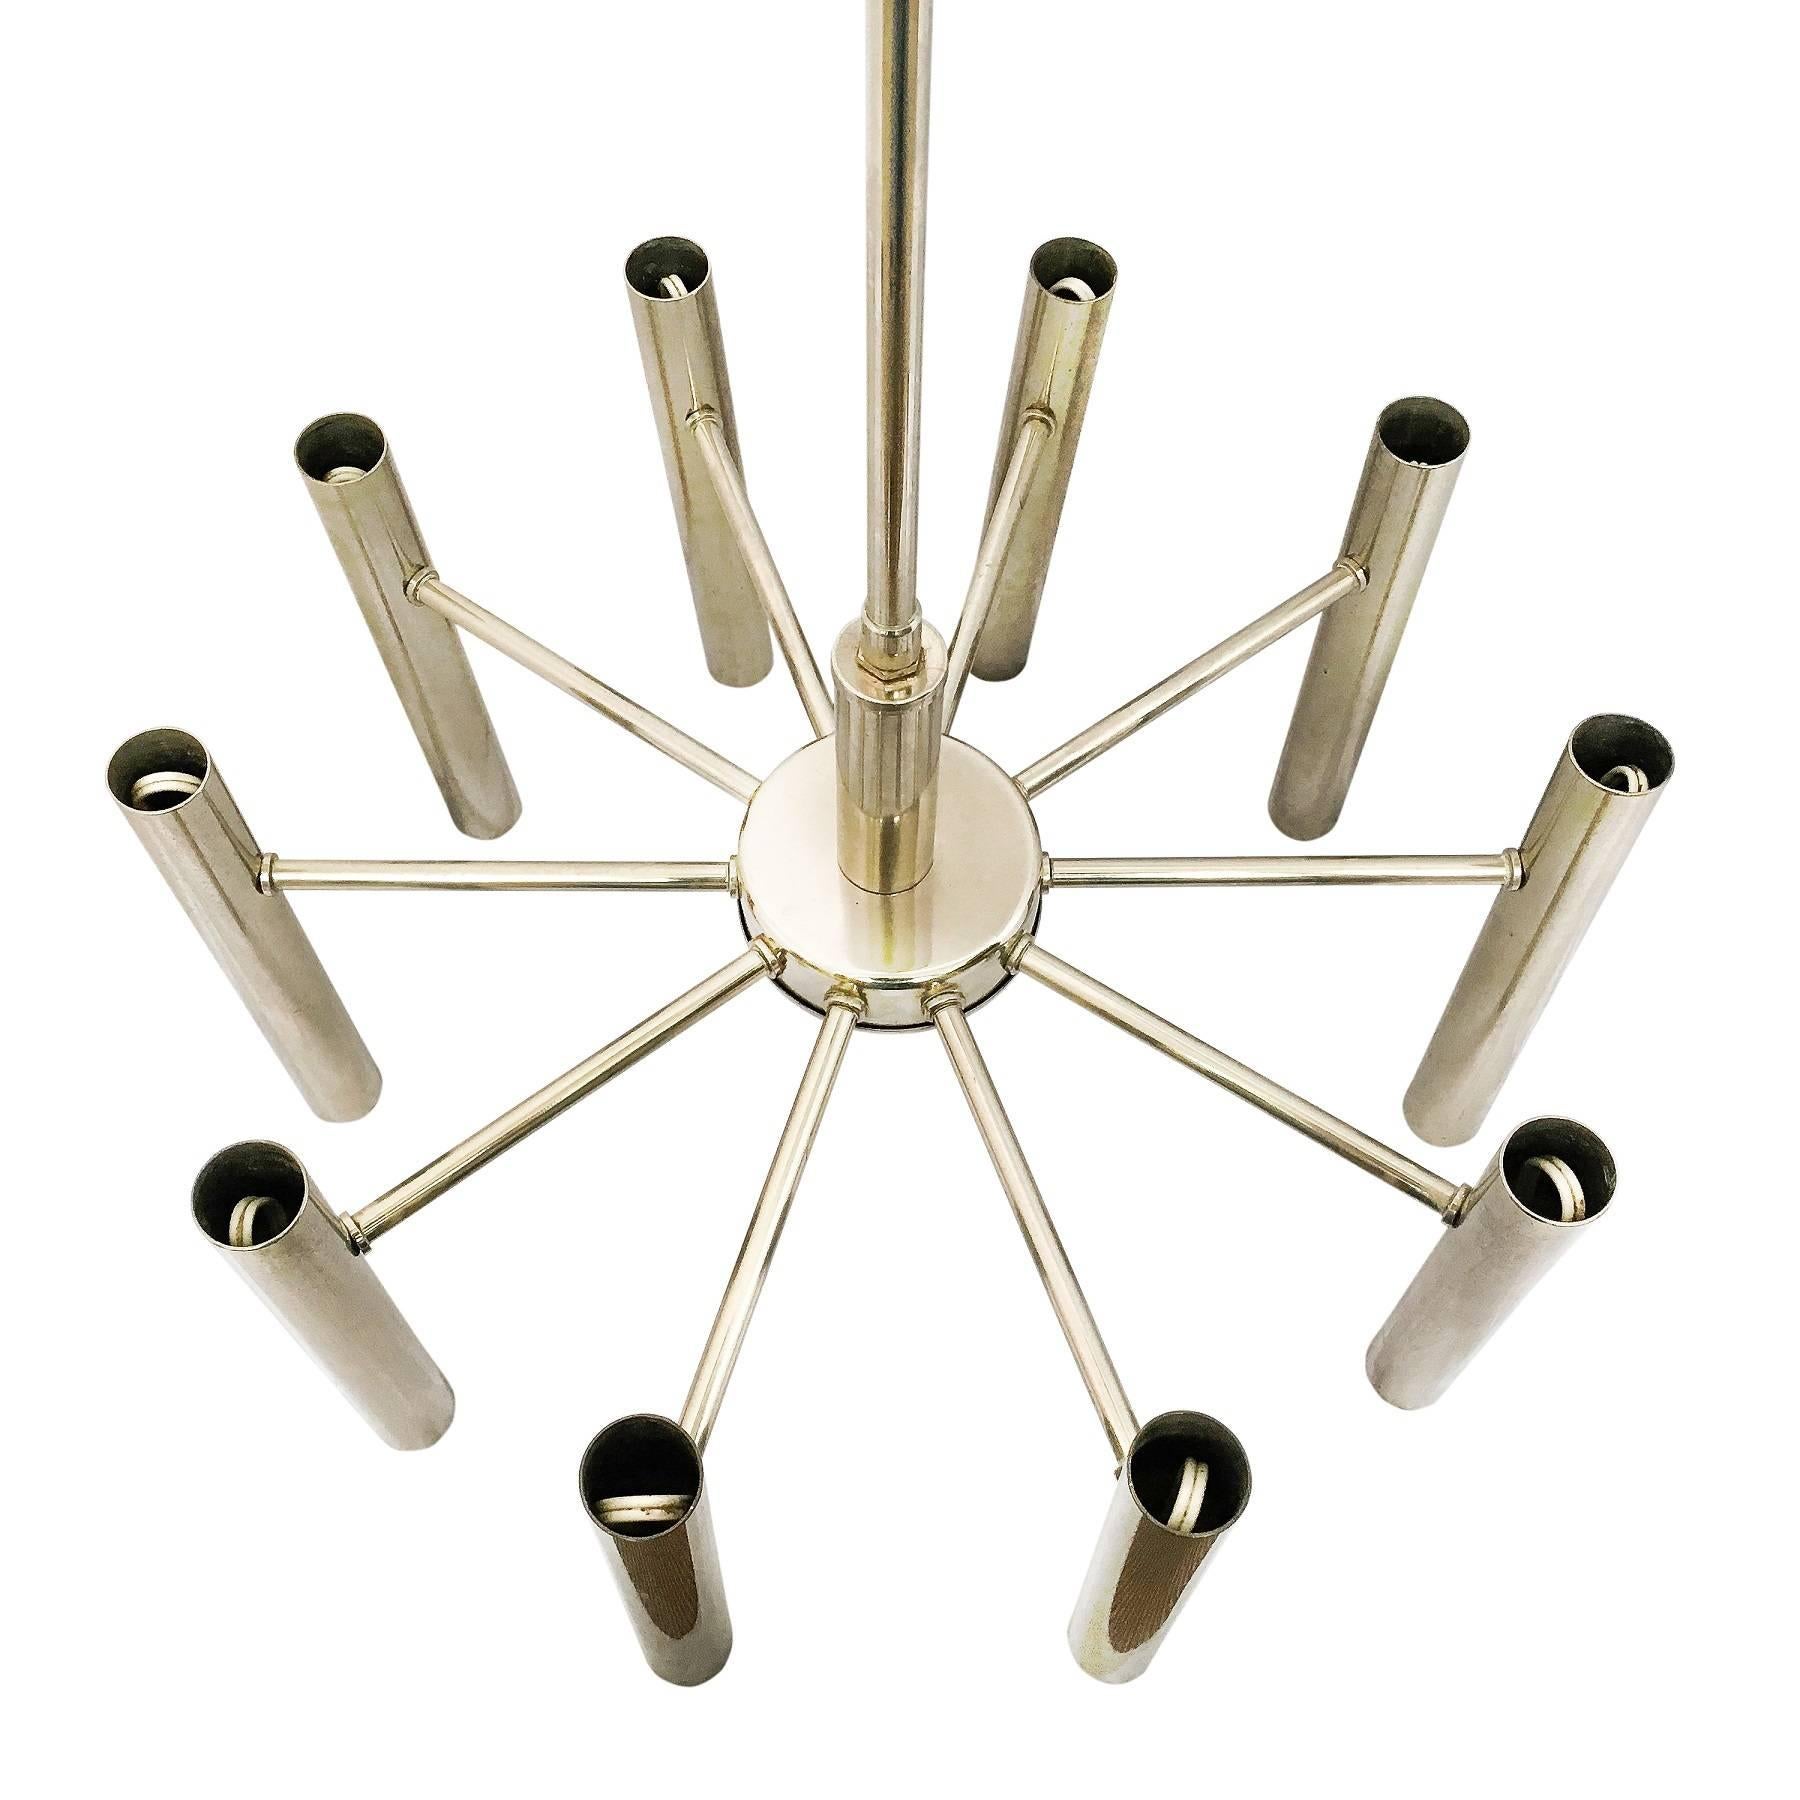 Gaetano Sciolari Sputnik chandelier was designed and produced in Italy during the 1960s-1970s for Boulanger.
 
The chandelier is chrome-plated on heavy brass. This light offers versatility and offers versatility with its rotating tubes, you can